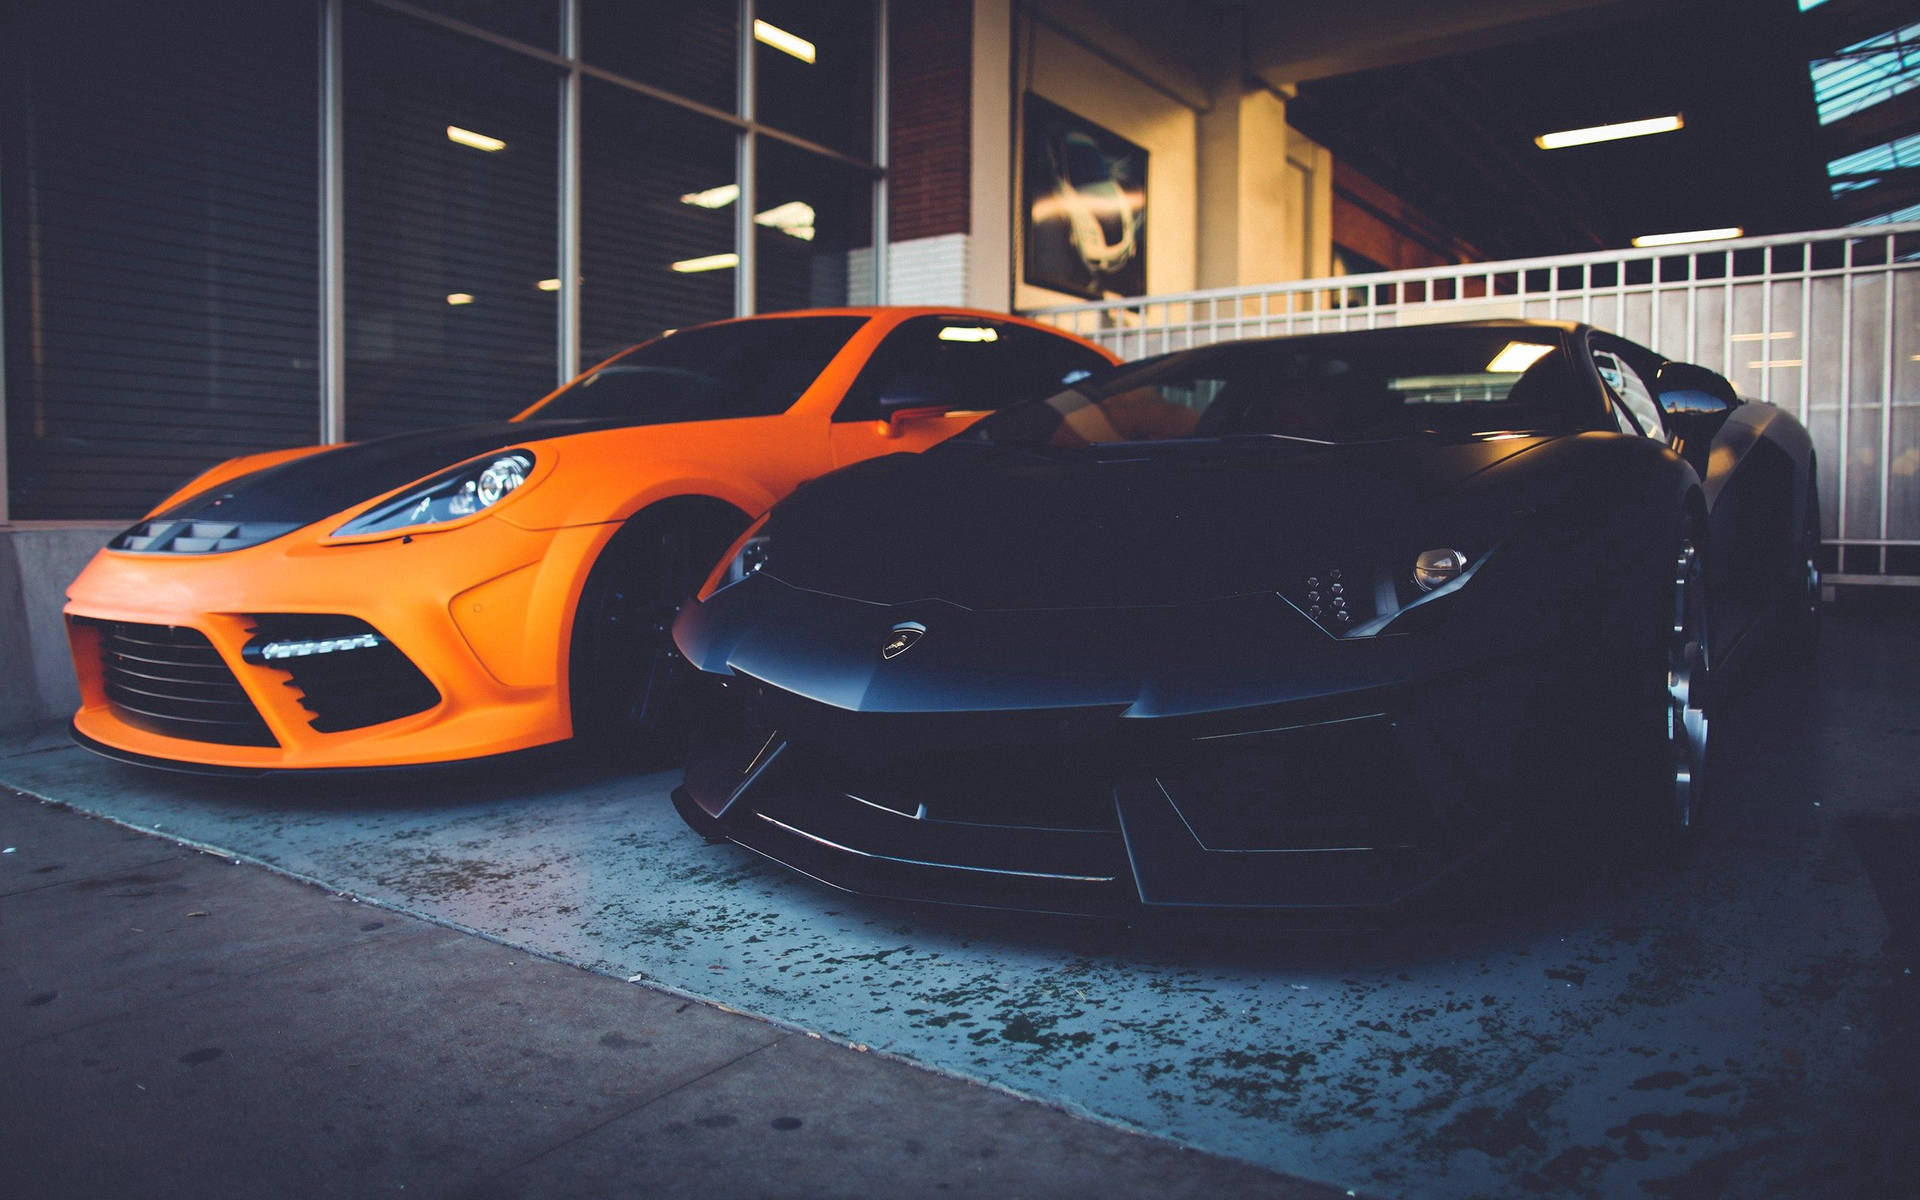 Power and Style - Two Luxury Lamborghinis Wallpaper